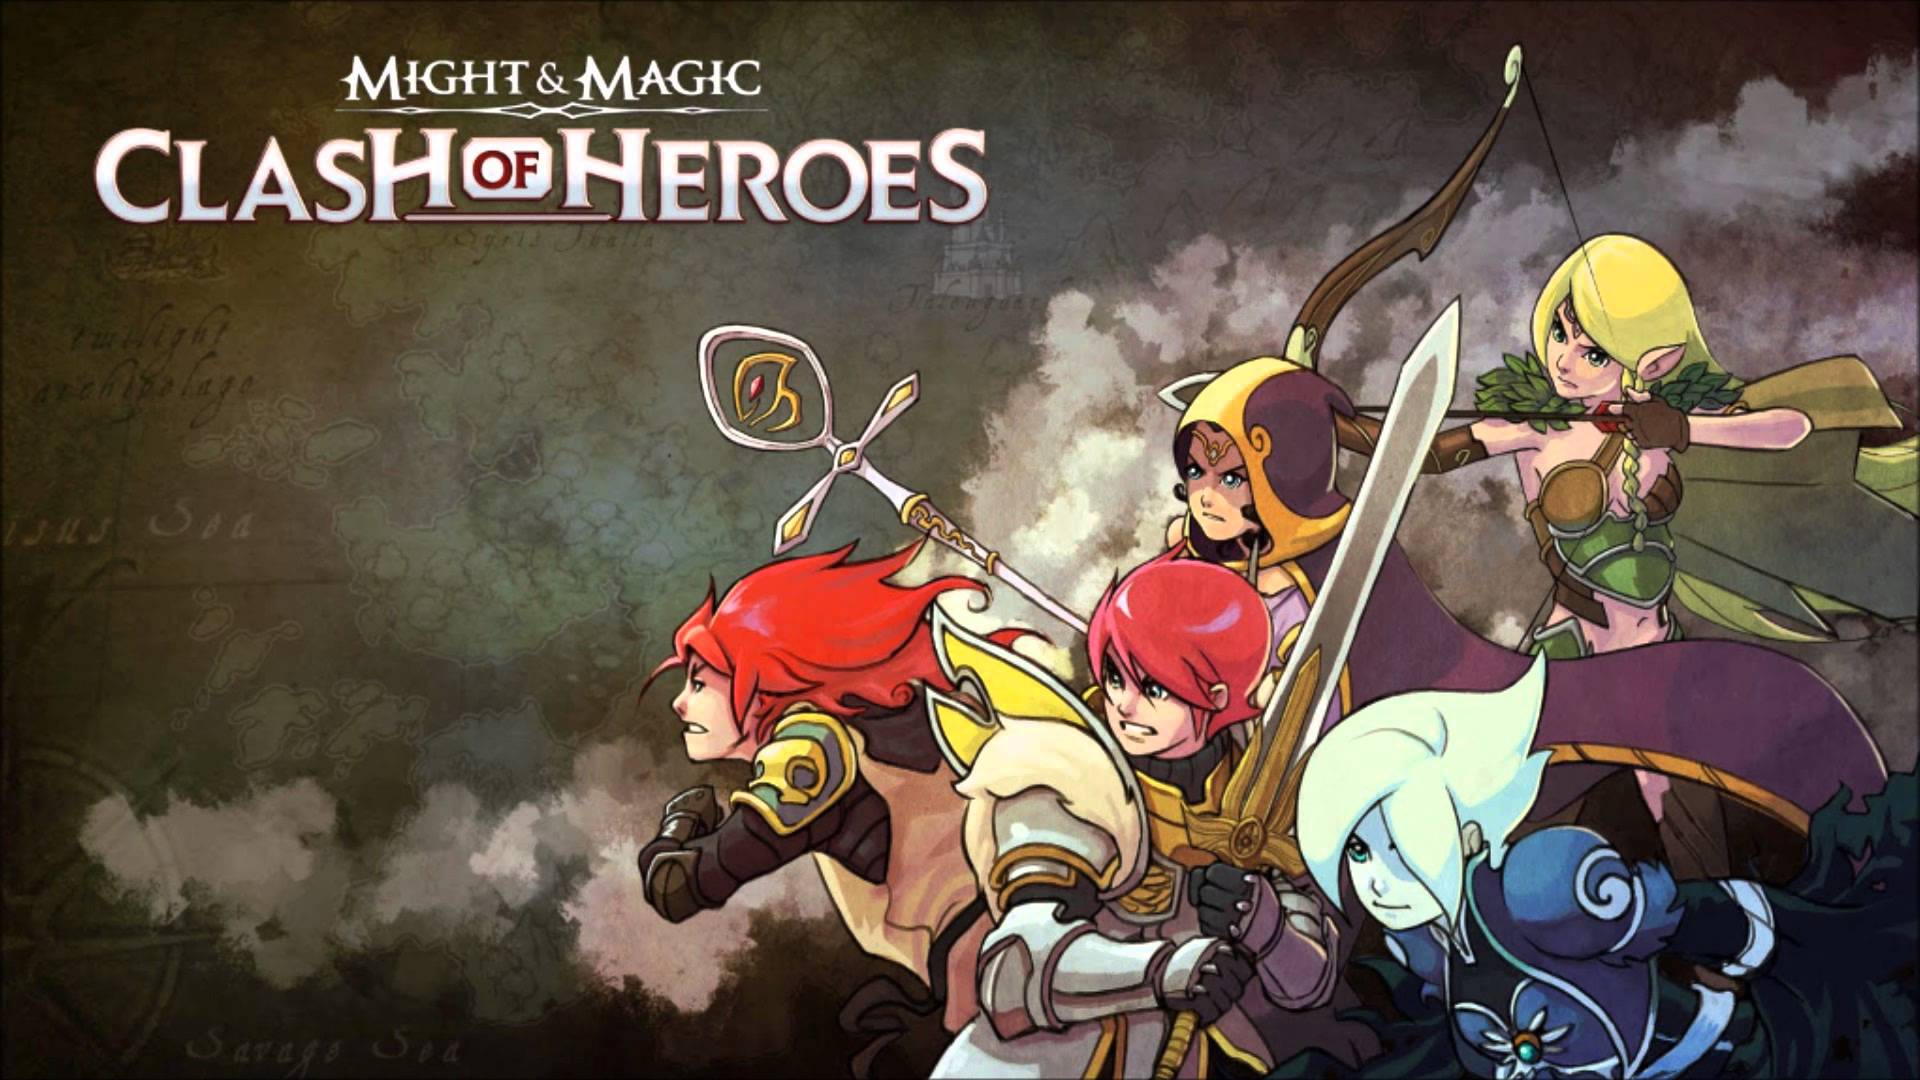 Might And Magic: Clash Of Heroes #24